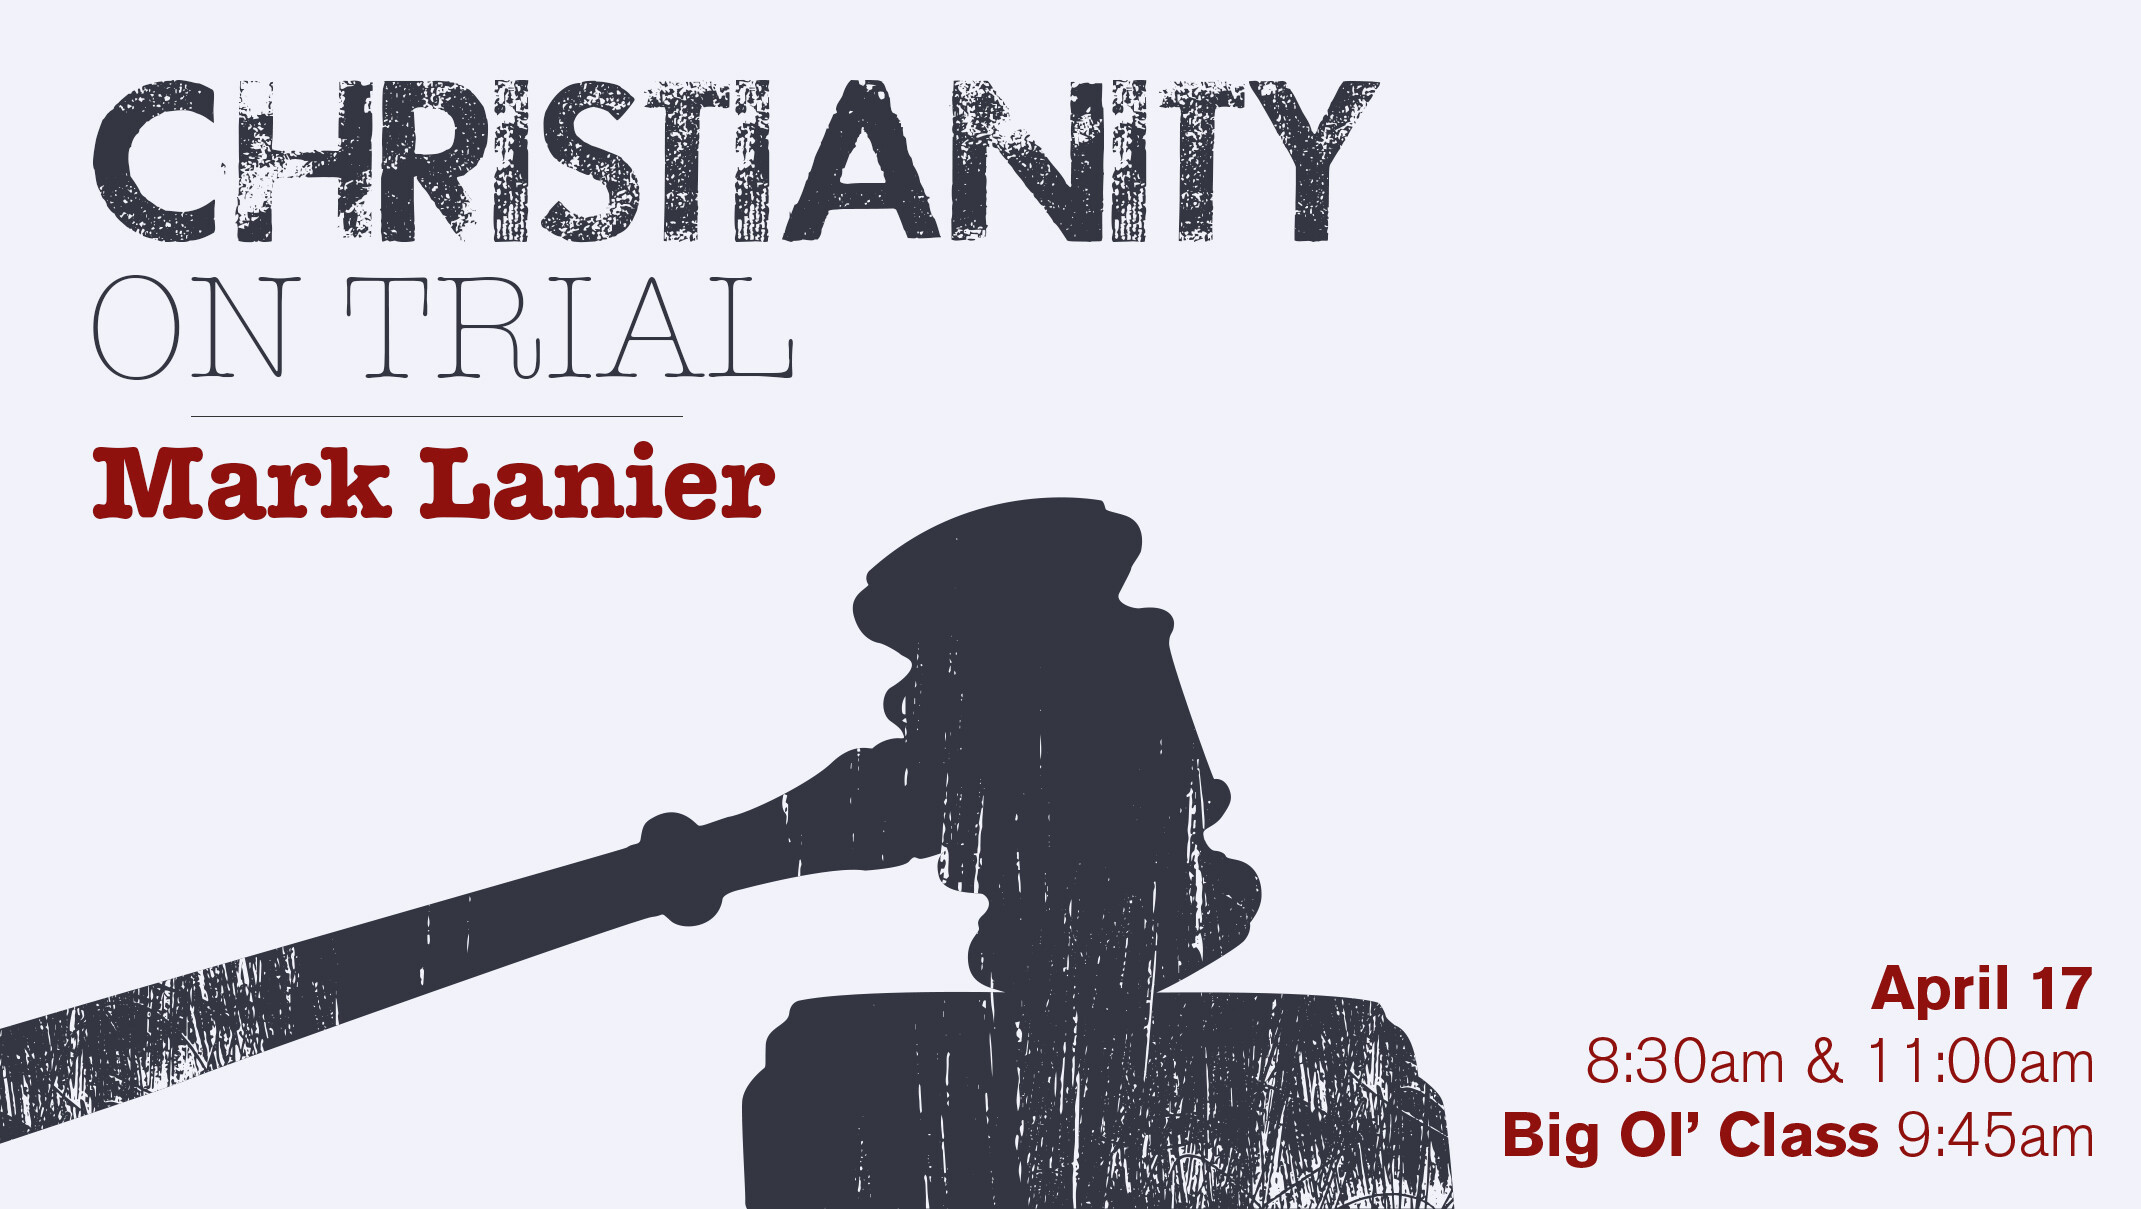 Christianity on Trial